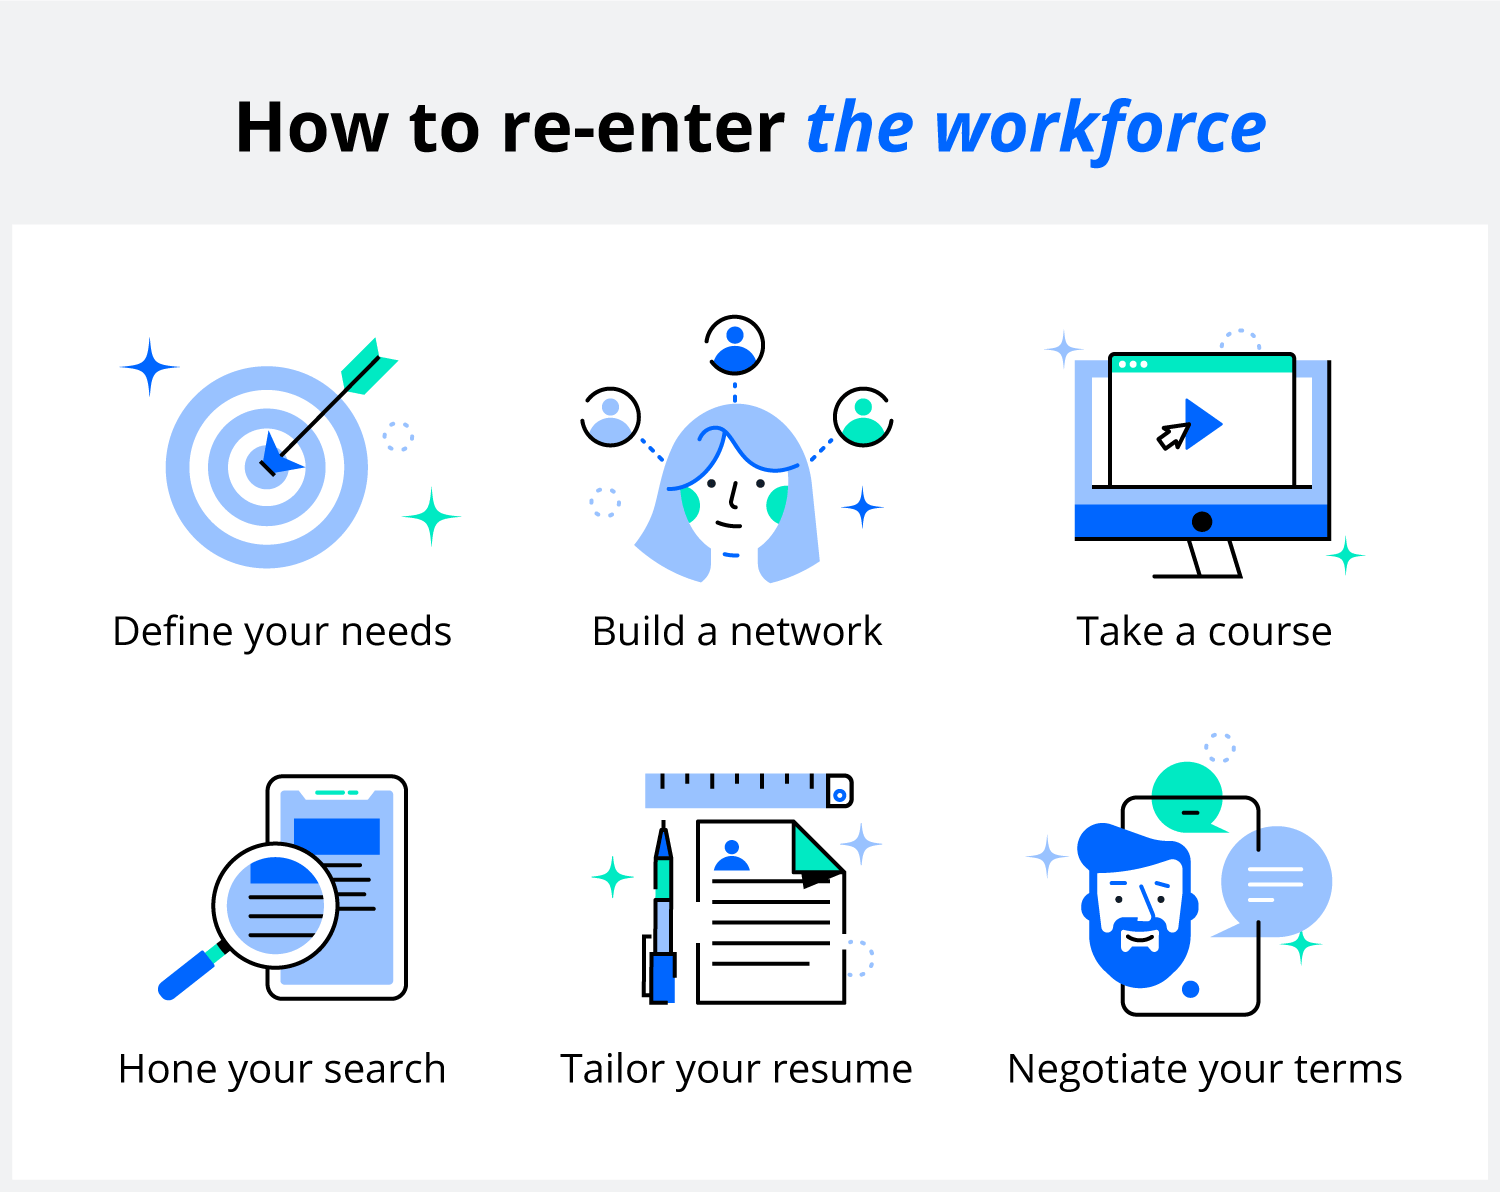 Six tips to begin your search as you prepare to re-enter the workforce.